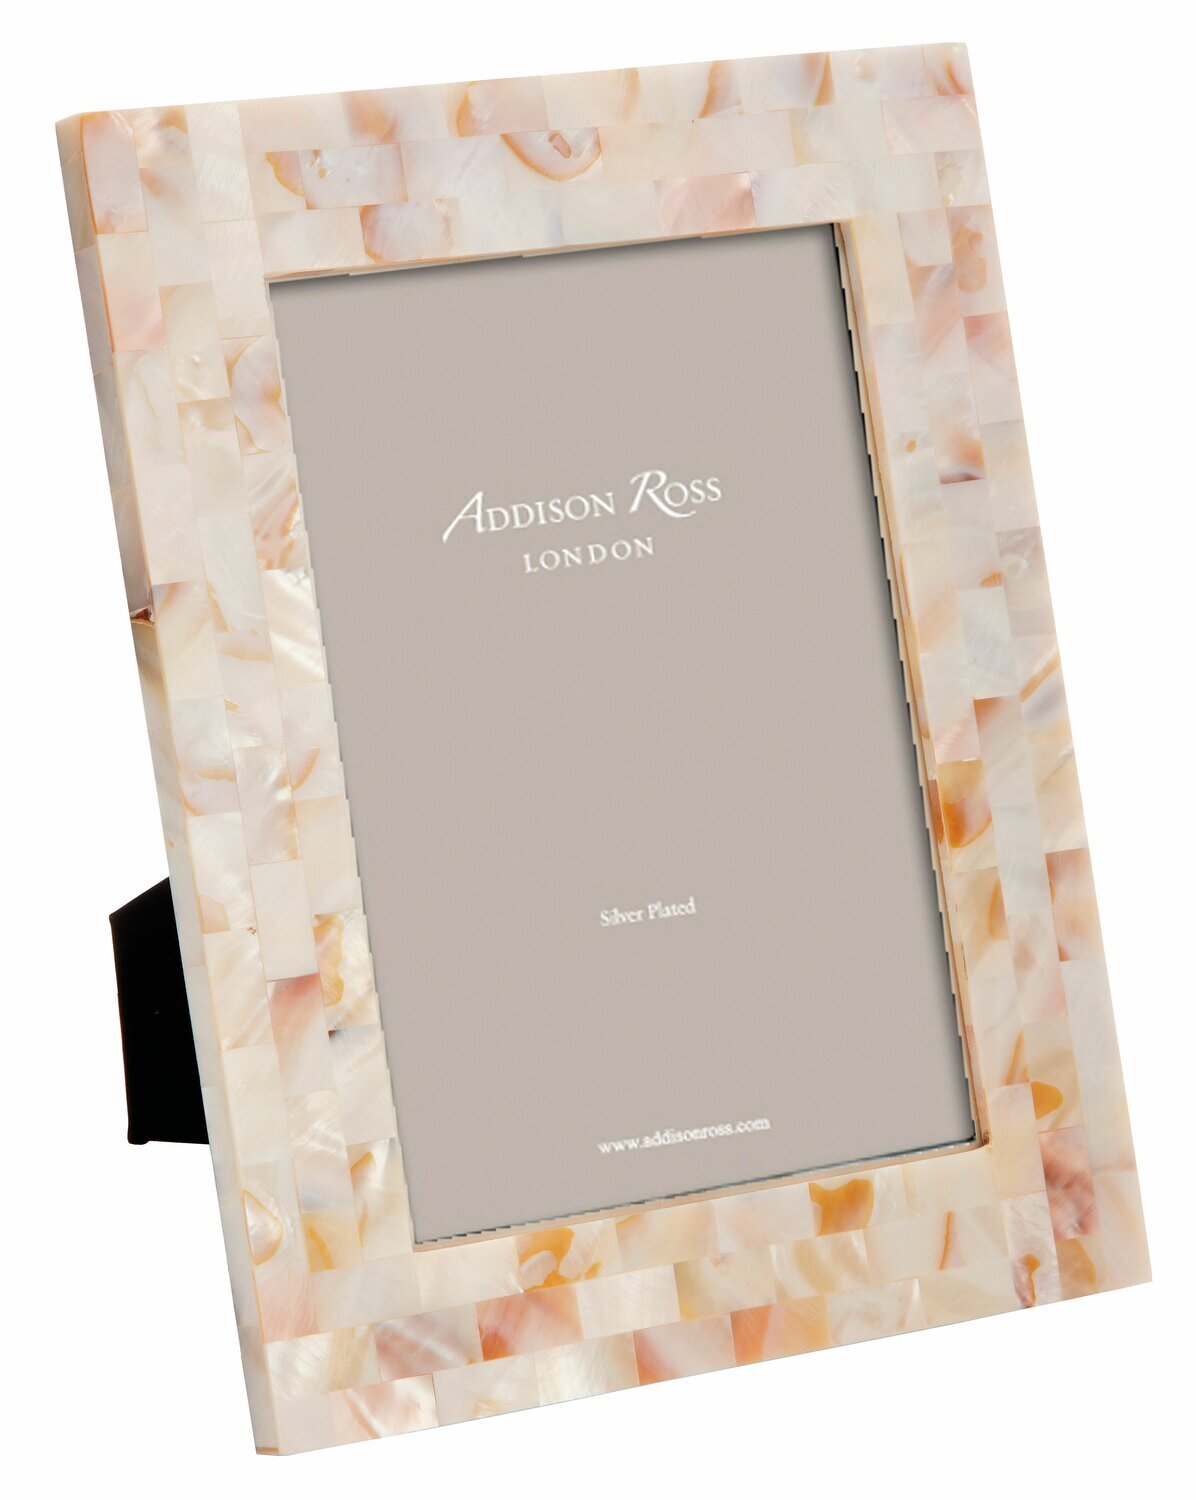 Addison Ross Chequer Board Mother Of Pearl Photo Frame 4 x 6 Inch MOP FR2256